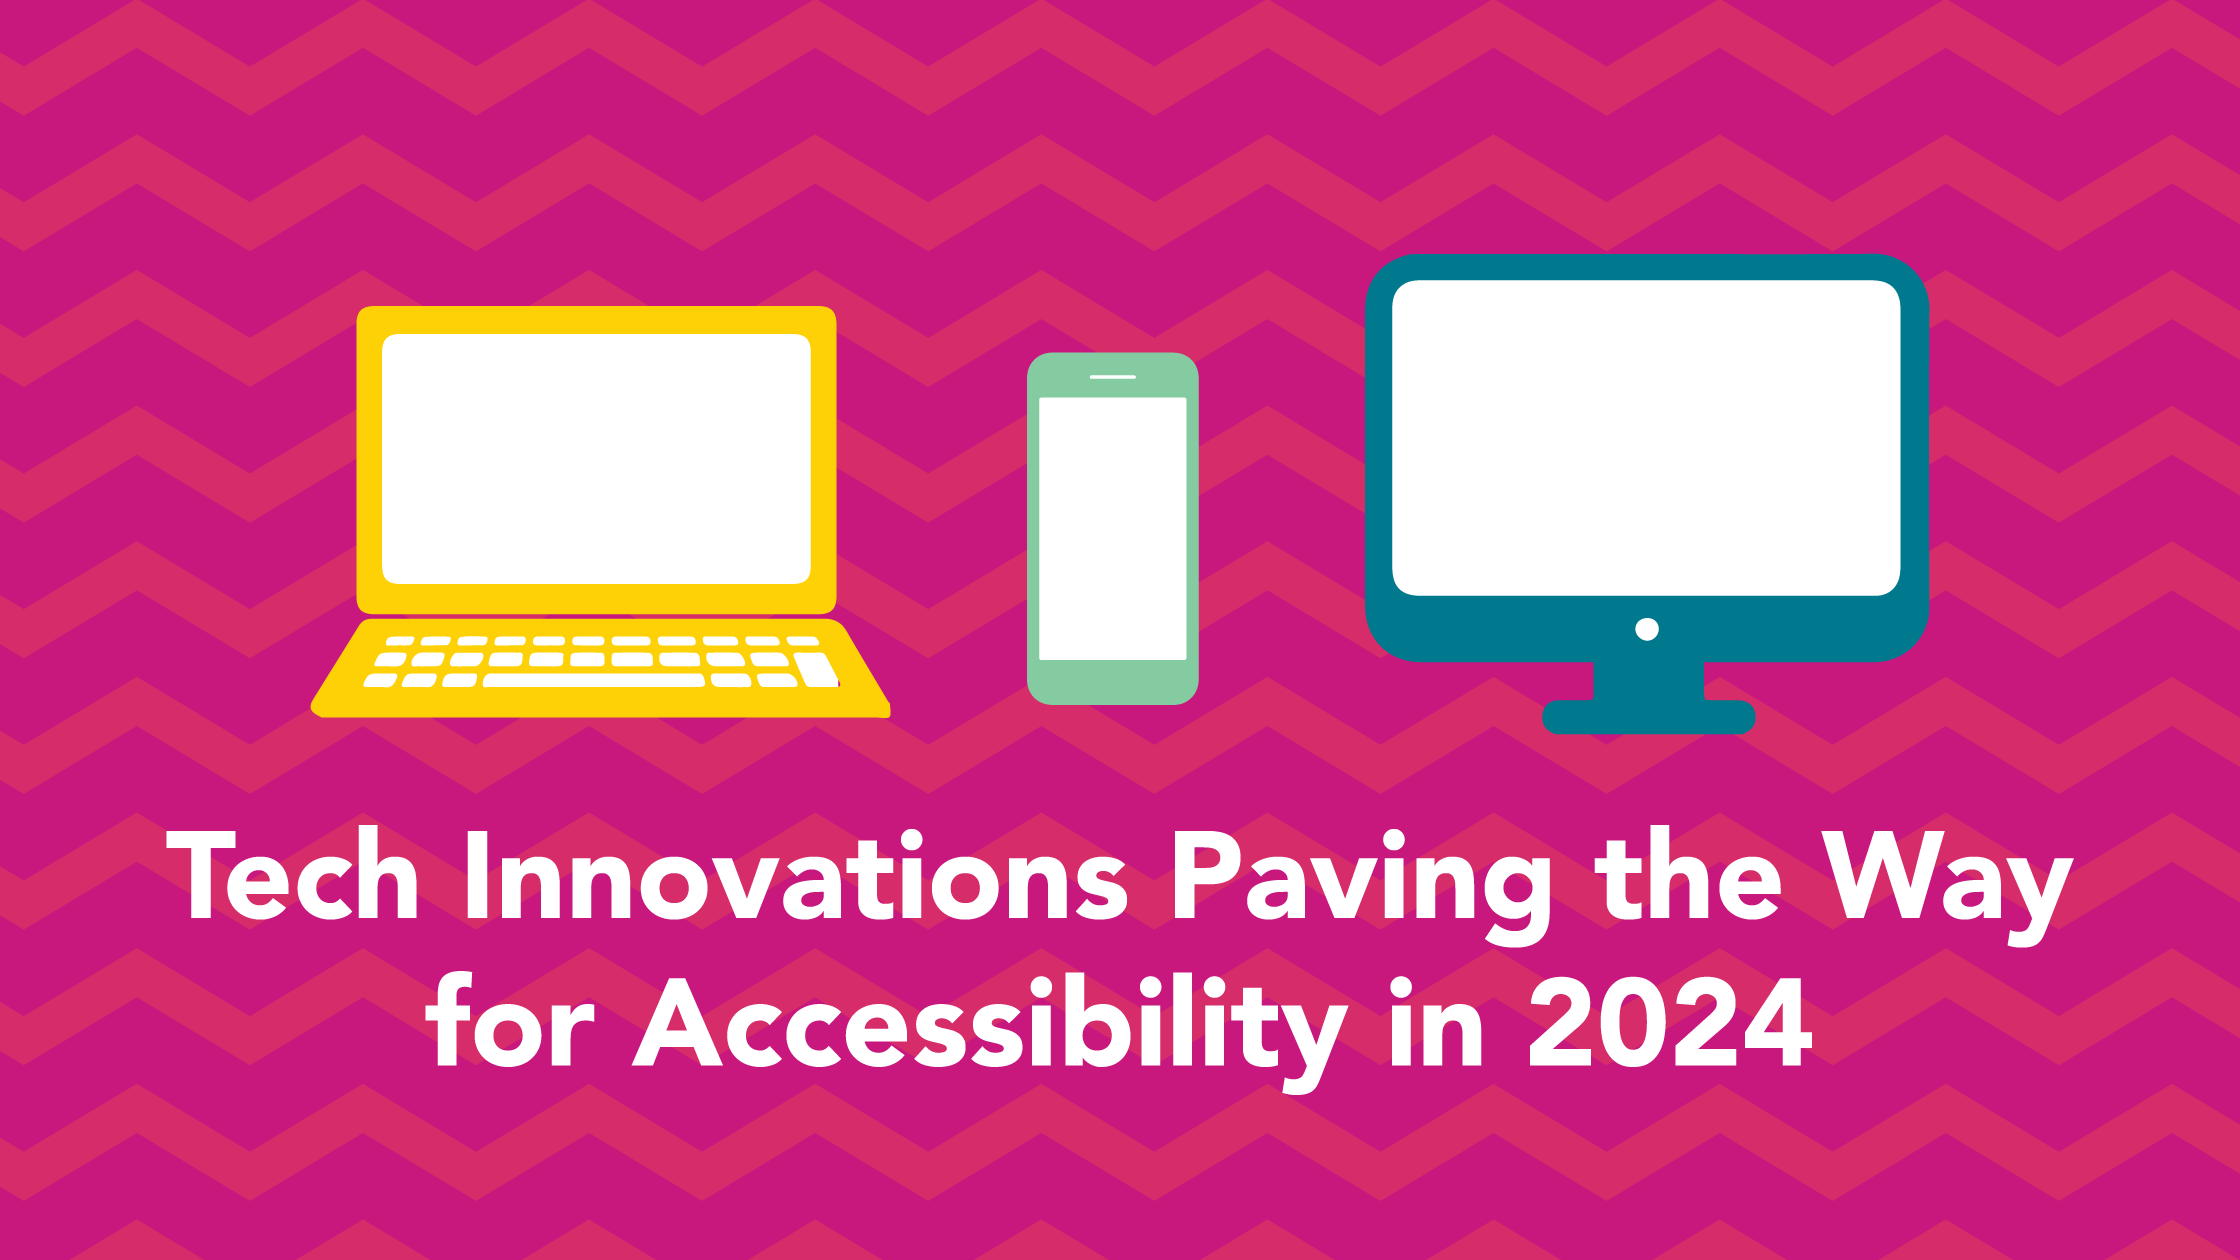 Tech Innovations Paving the Way for Accessibility in 2024